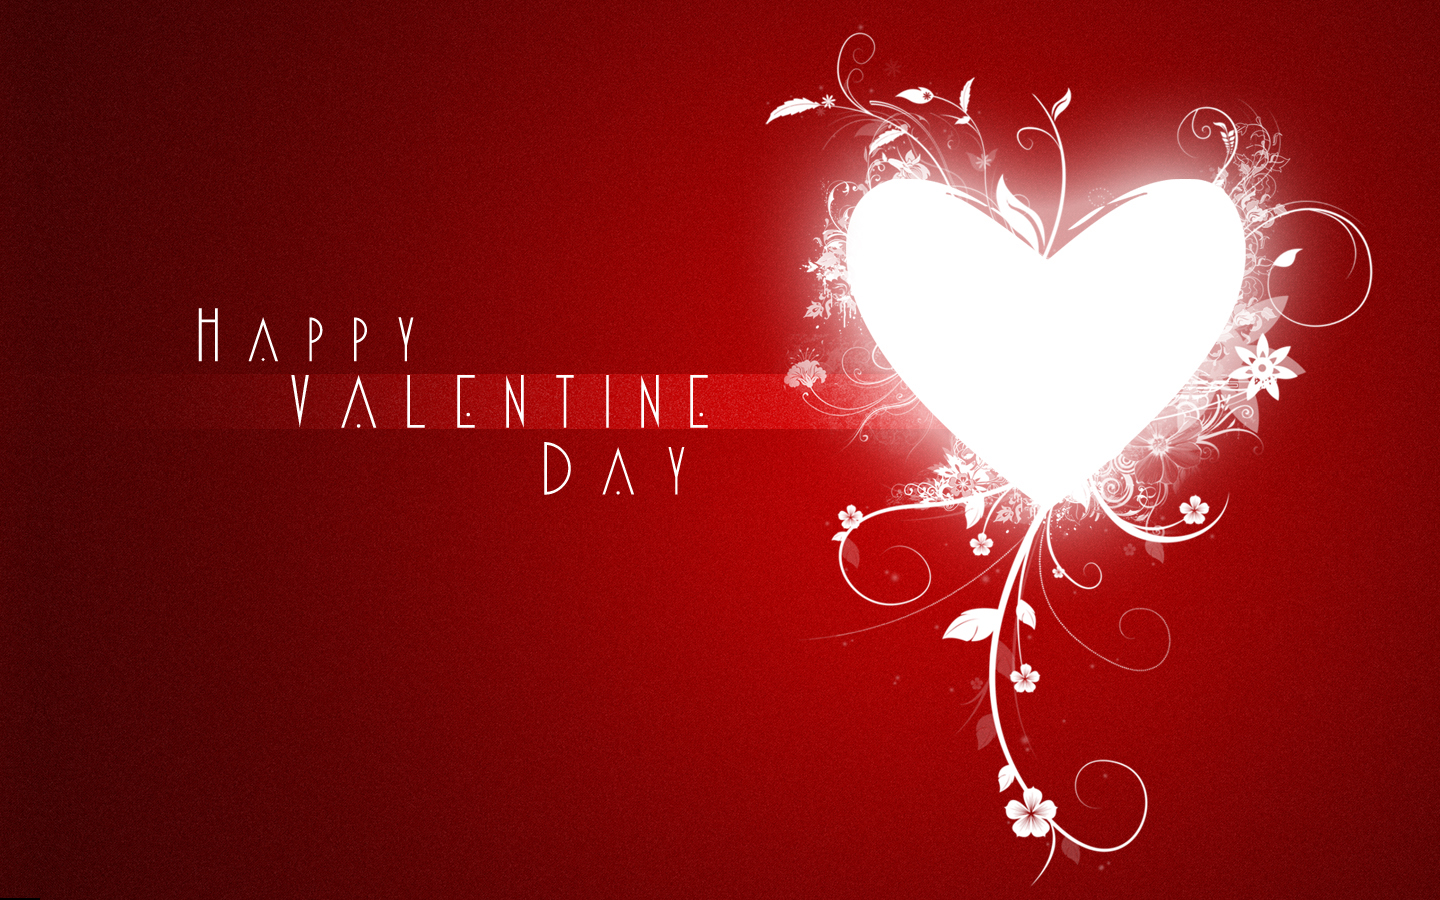 Download 21 valentine-backgrounds-free Free-Valentines-Day-Background-Candy-Hearts.jpg